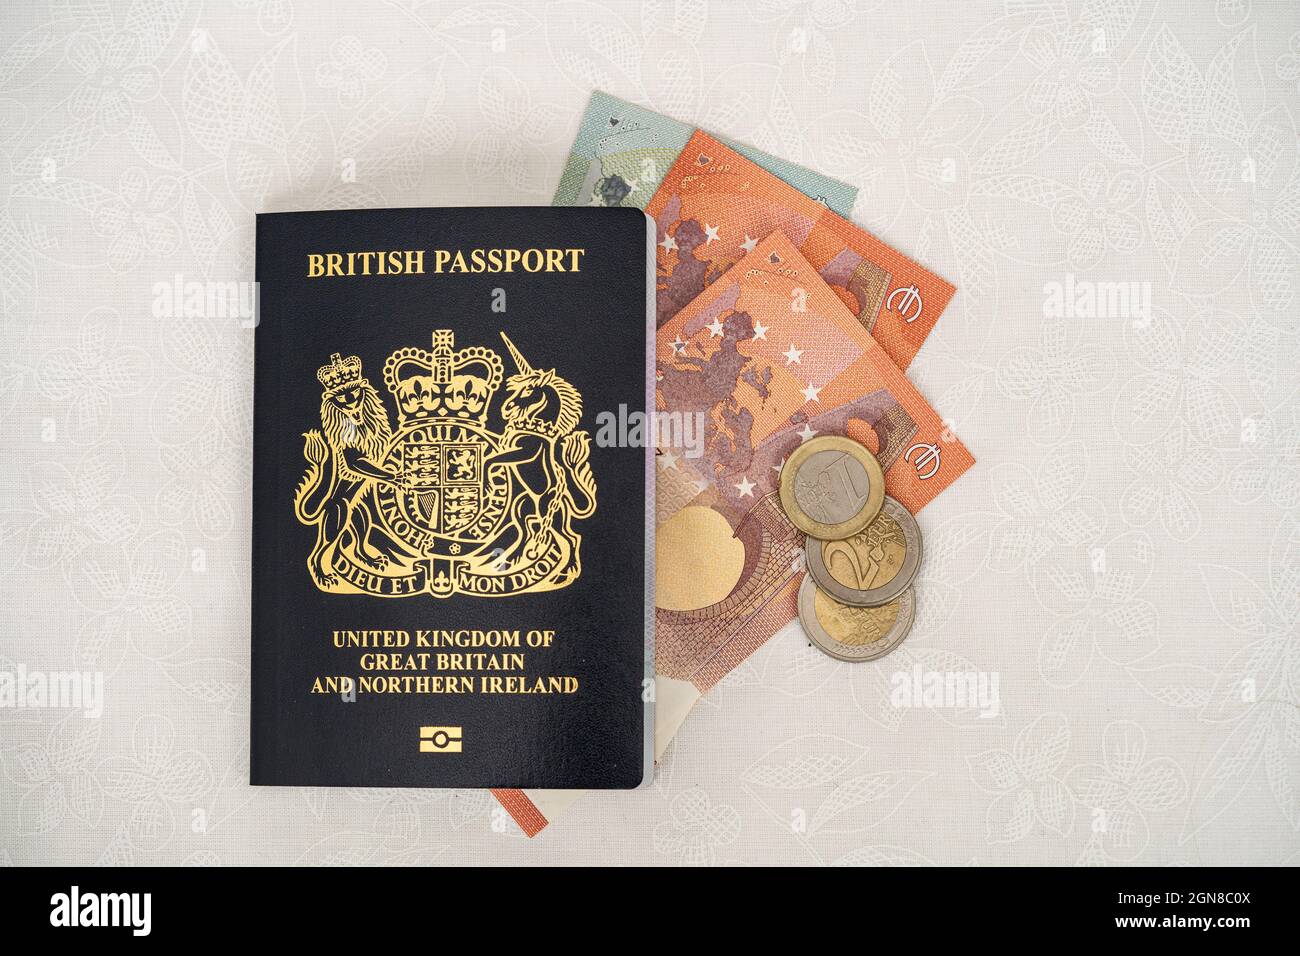 Post Brexit British Passport United Kingdom of Great Britain and Northern Ireland with euro notes and coins Stock Photo